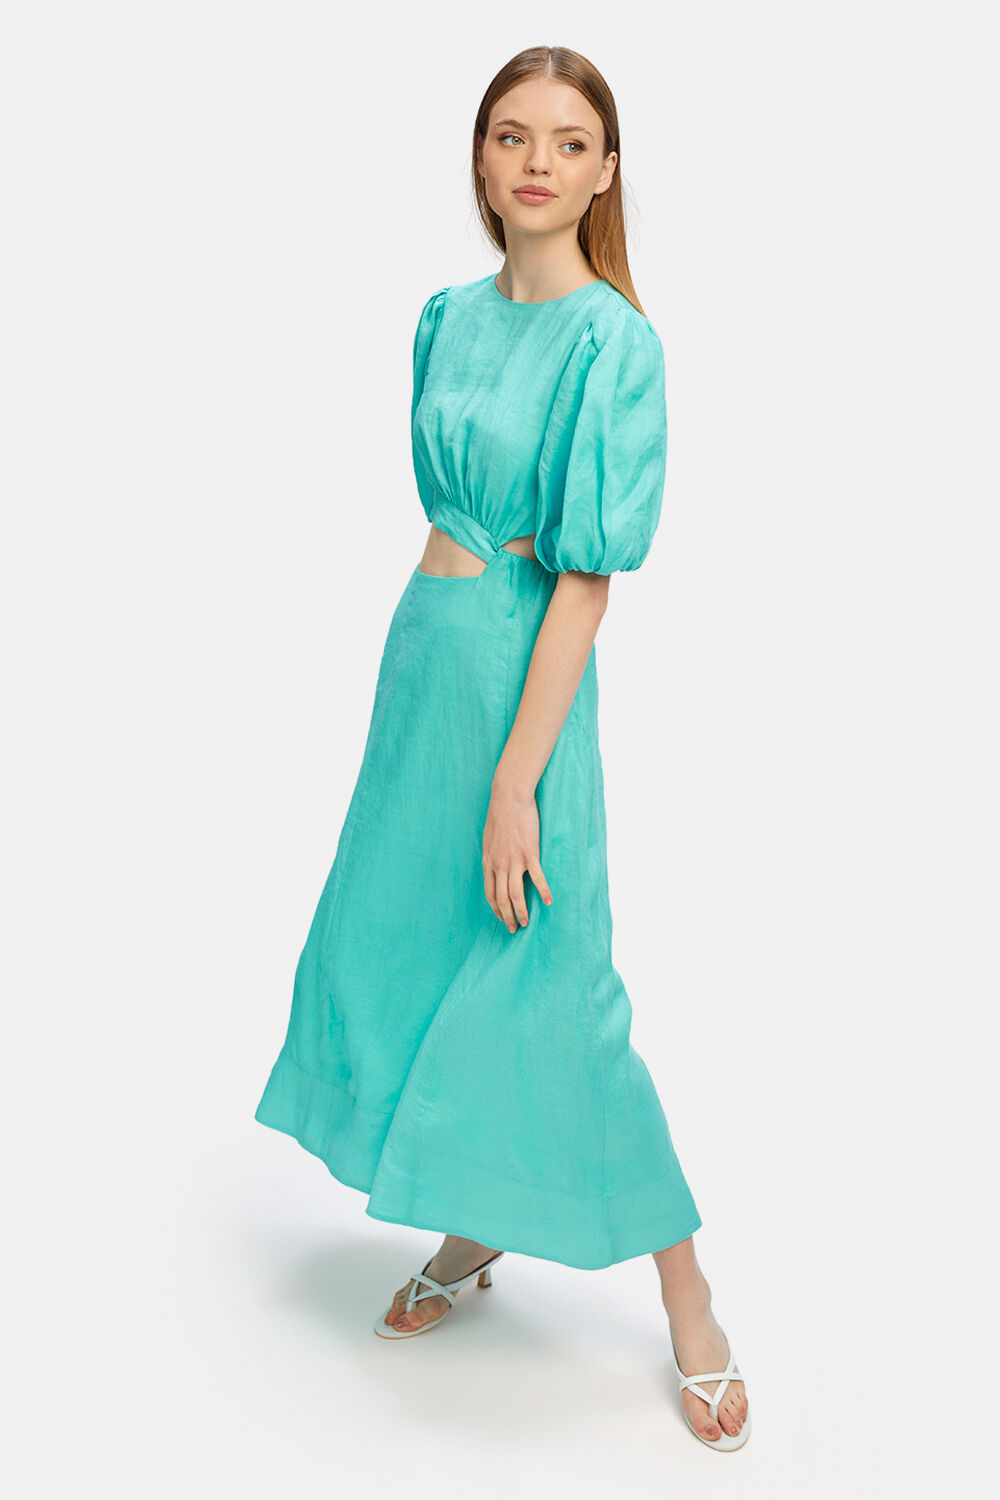 IMPALA MIDI DRESS in colour CLEARWATER